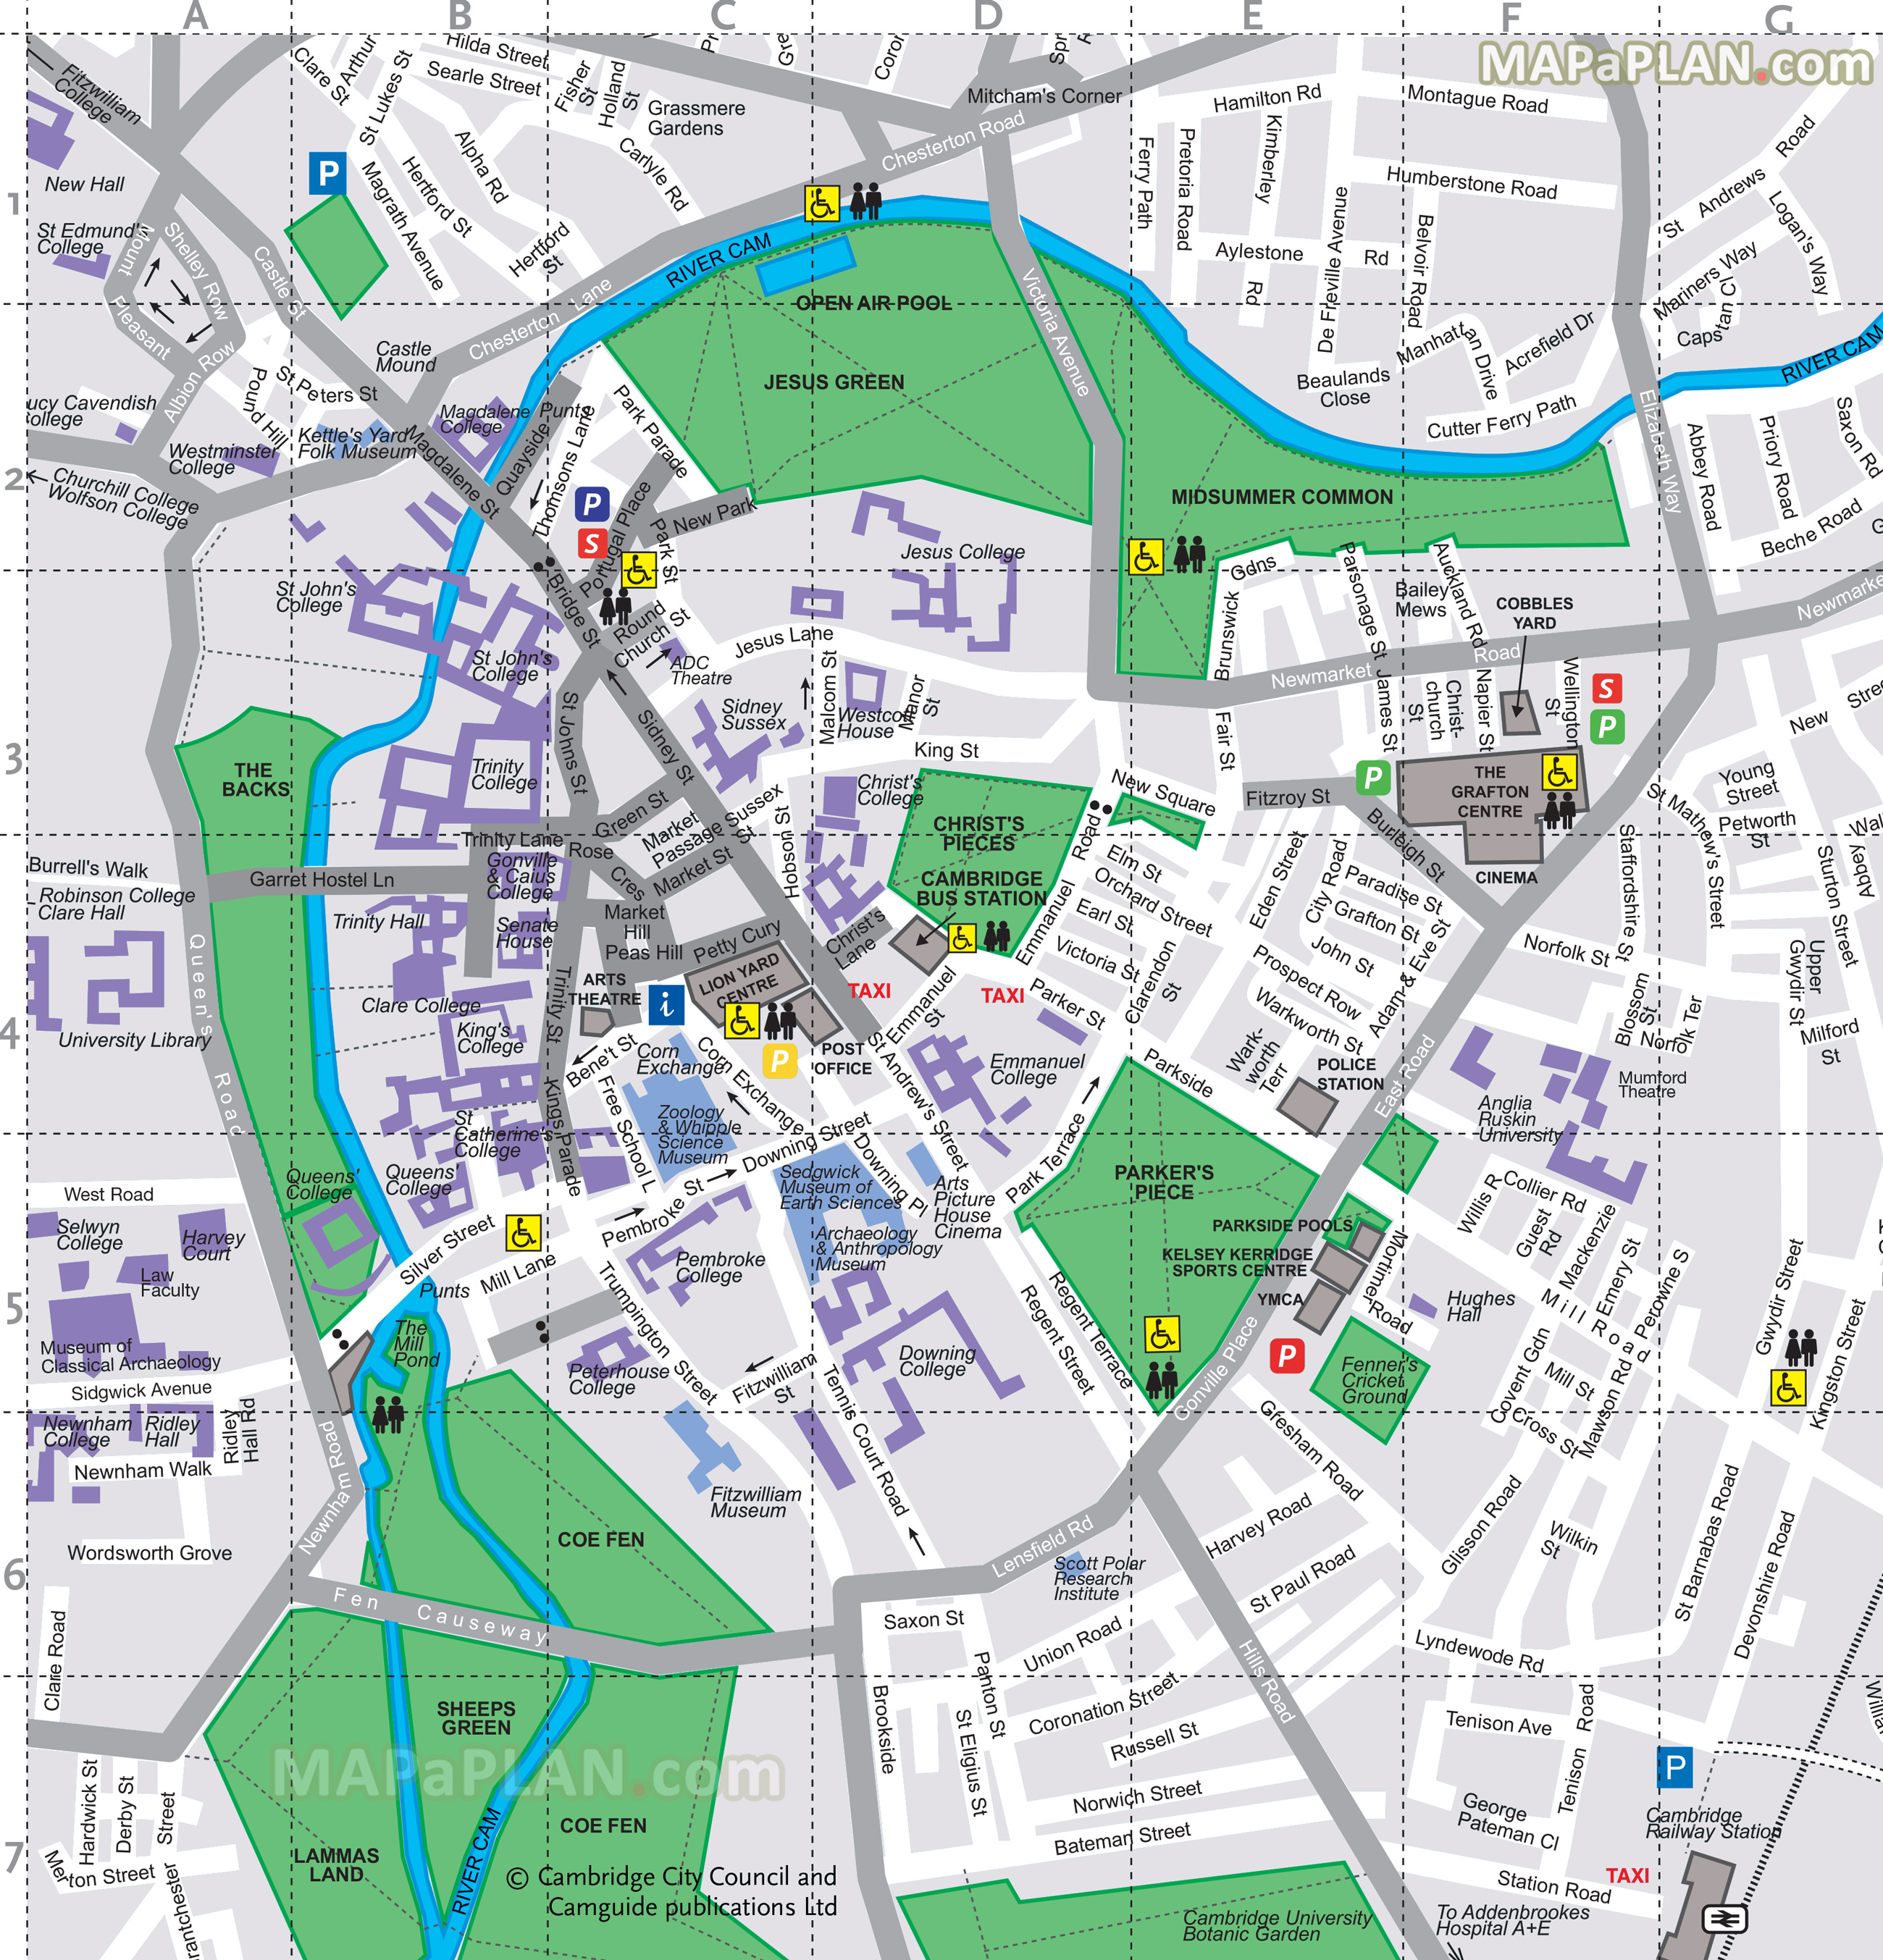 Free virtual map of famous travel attractions Cambridge top tourist attractions map